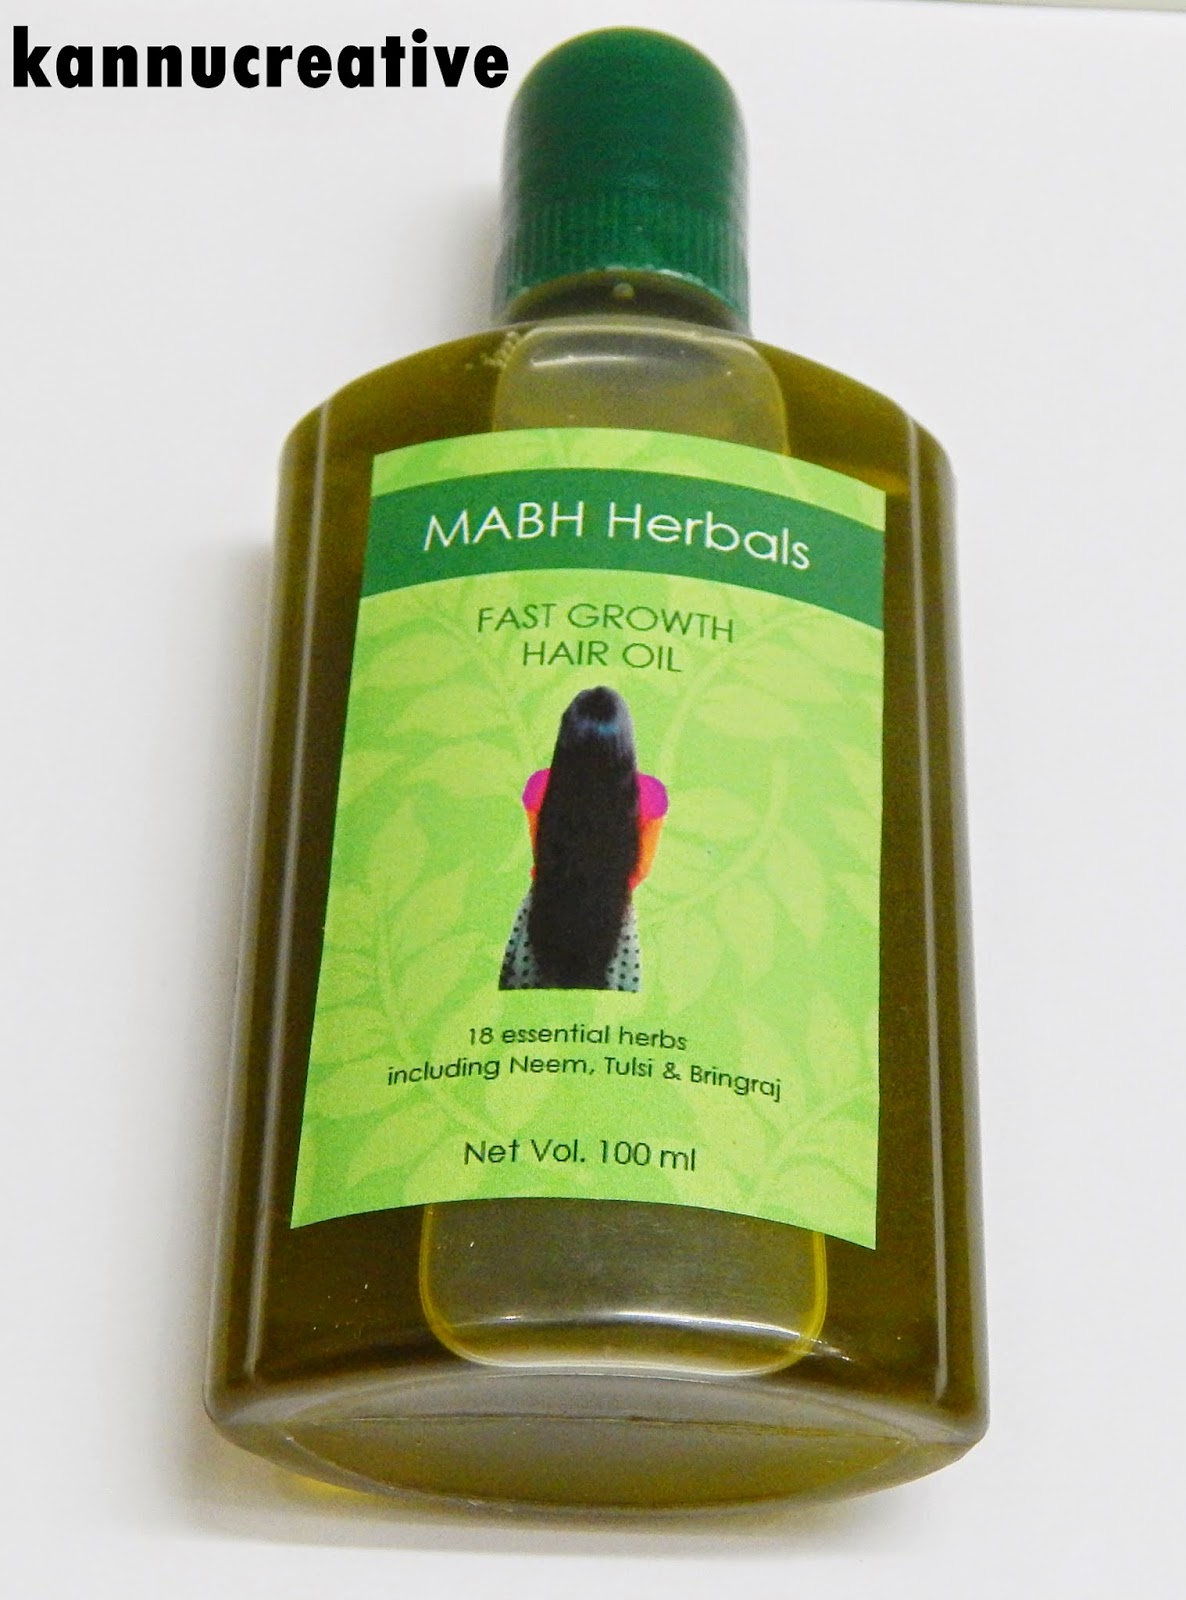 MABH Herbals Fast Growth Hair Oil: Review + Swatch + One month journey +  Before & After Pictures